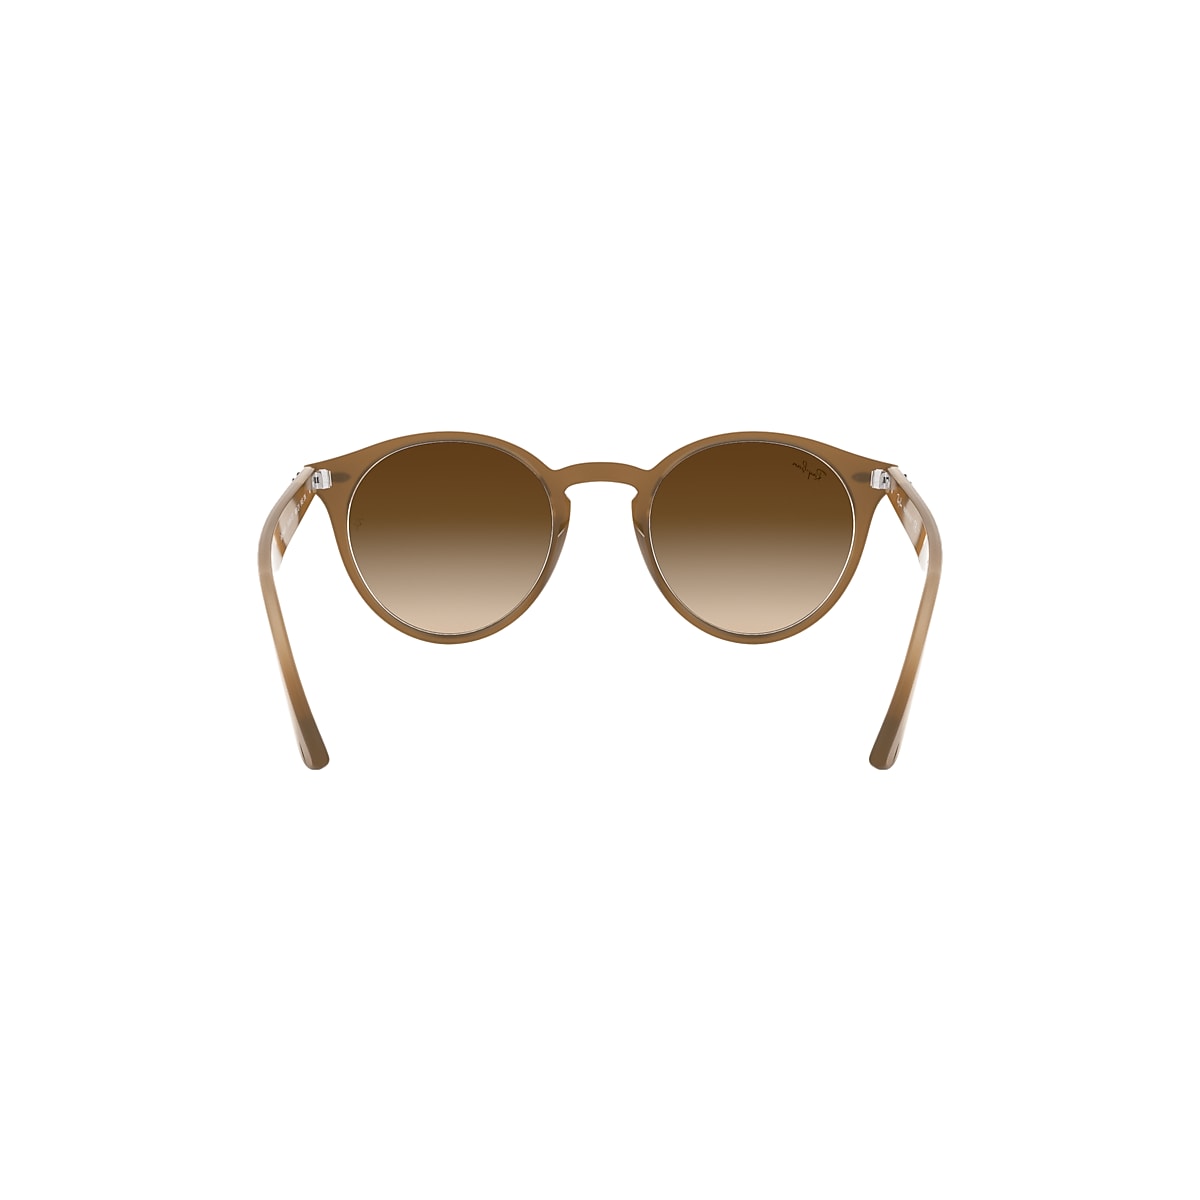 RB2180 Sunglasses in Light Brown and Brown - RB2180F | Ray-Ban® US